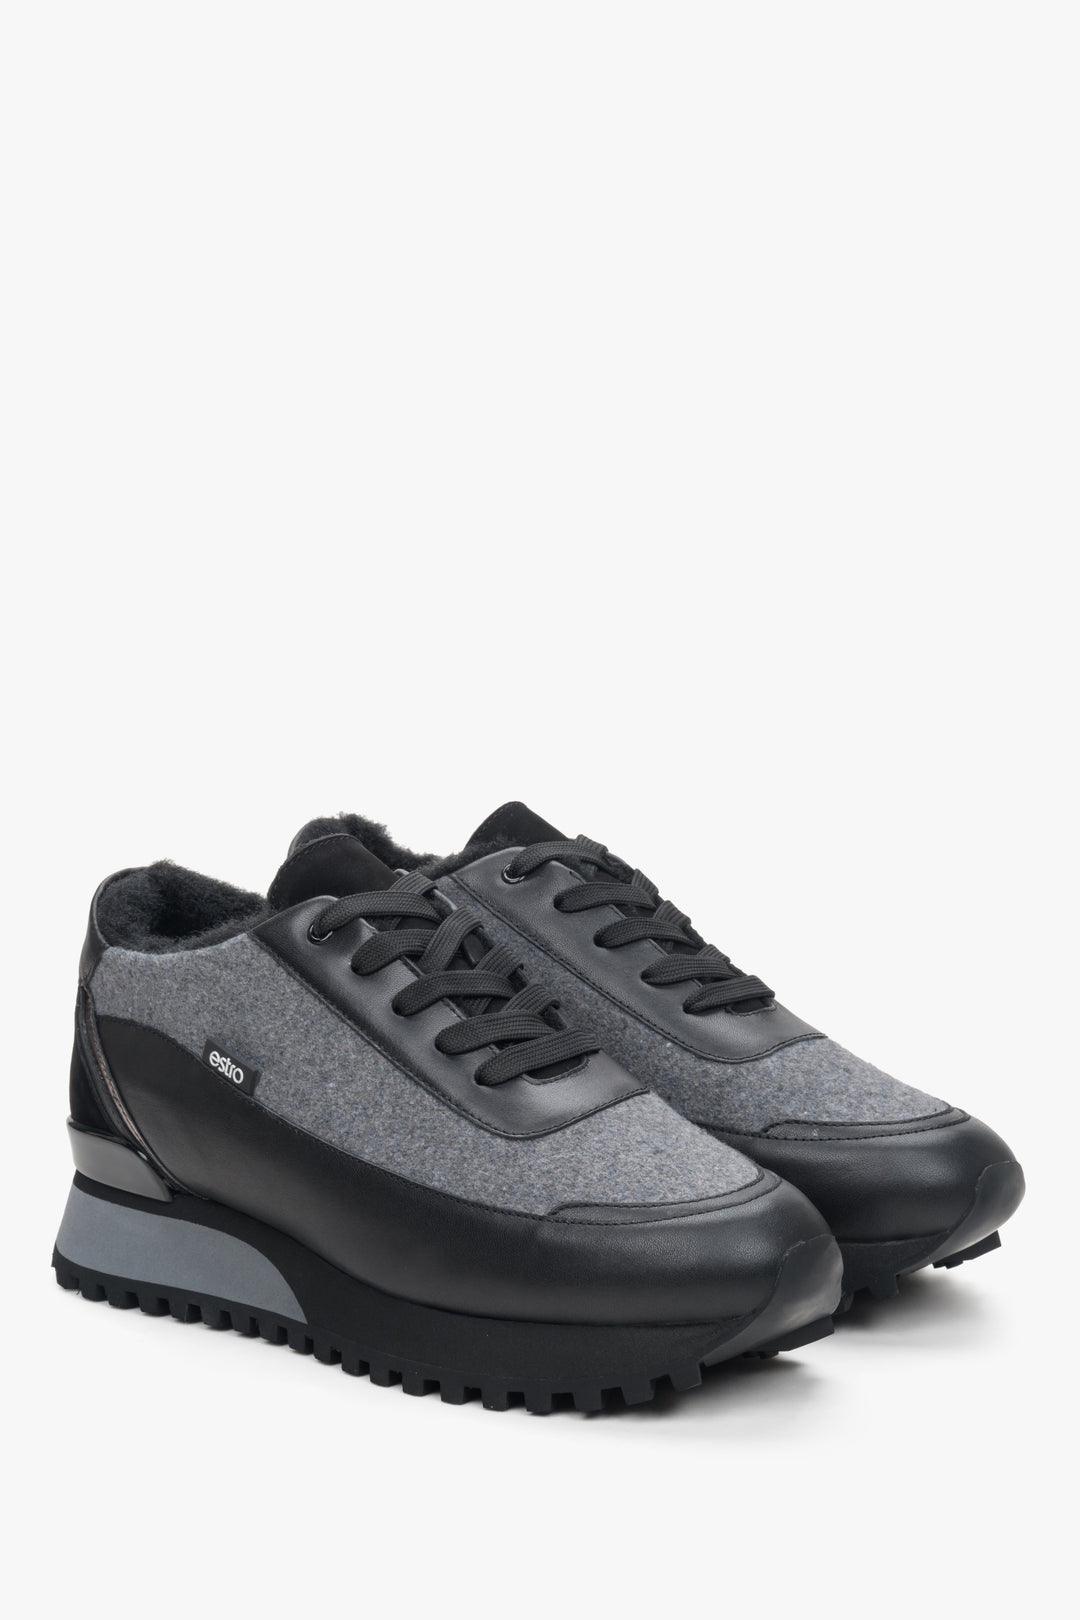 Women's black and grey winter sneakers made of combined materials by Estro.